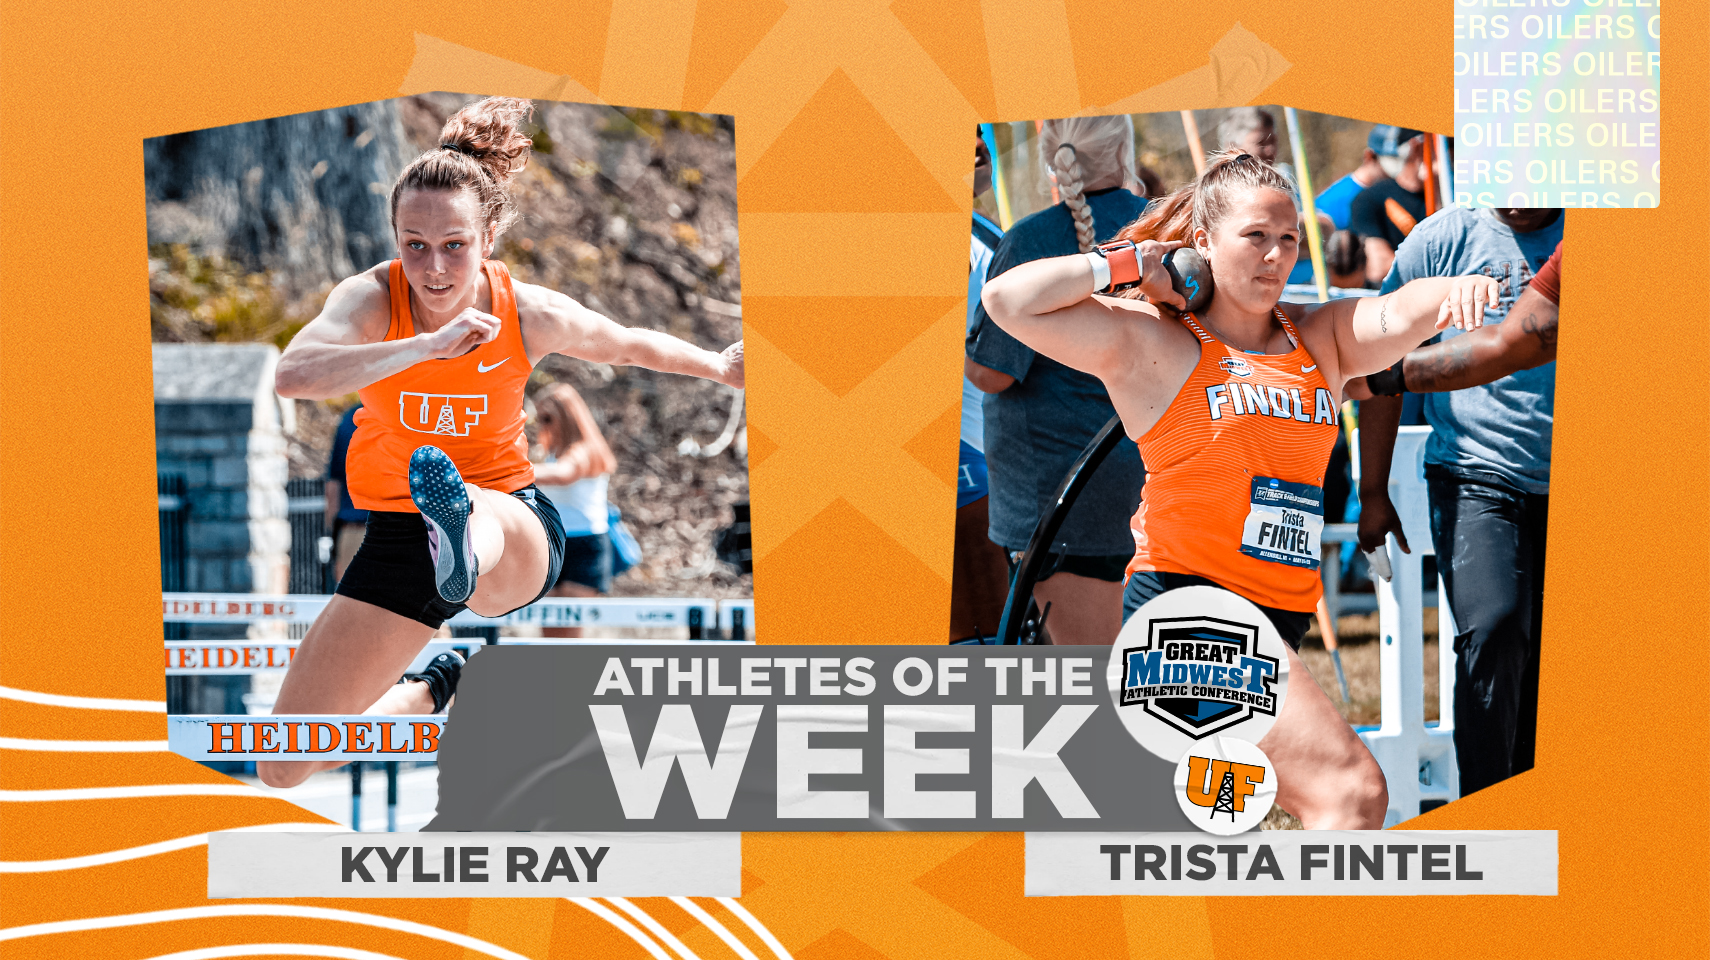 Ray and Fintel Earn Athlete of the Week